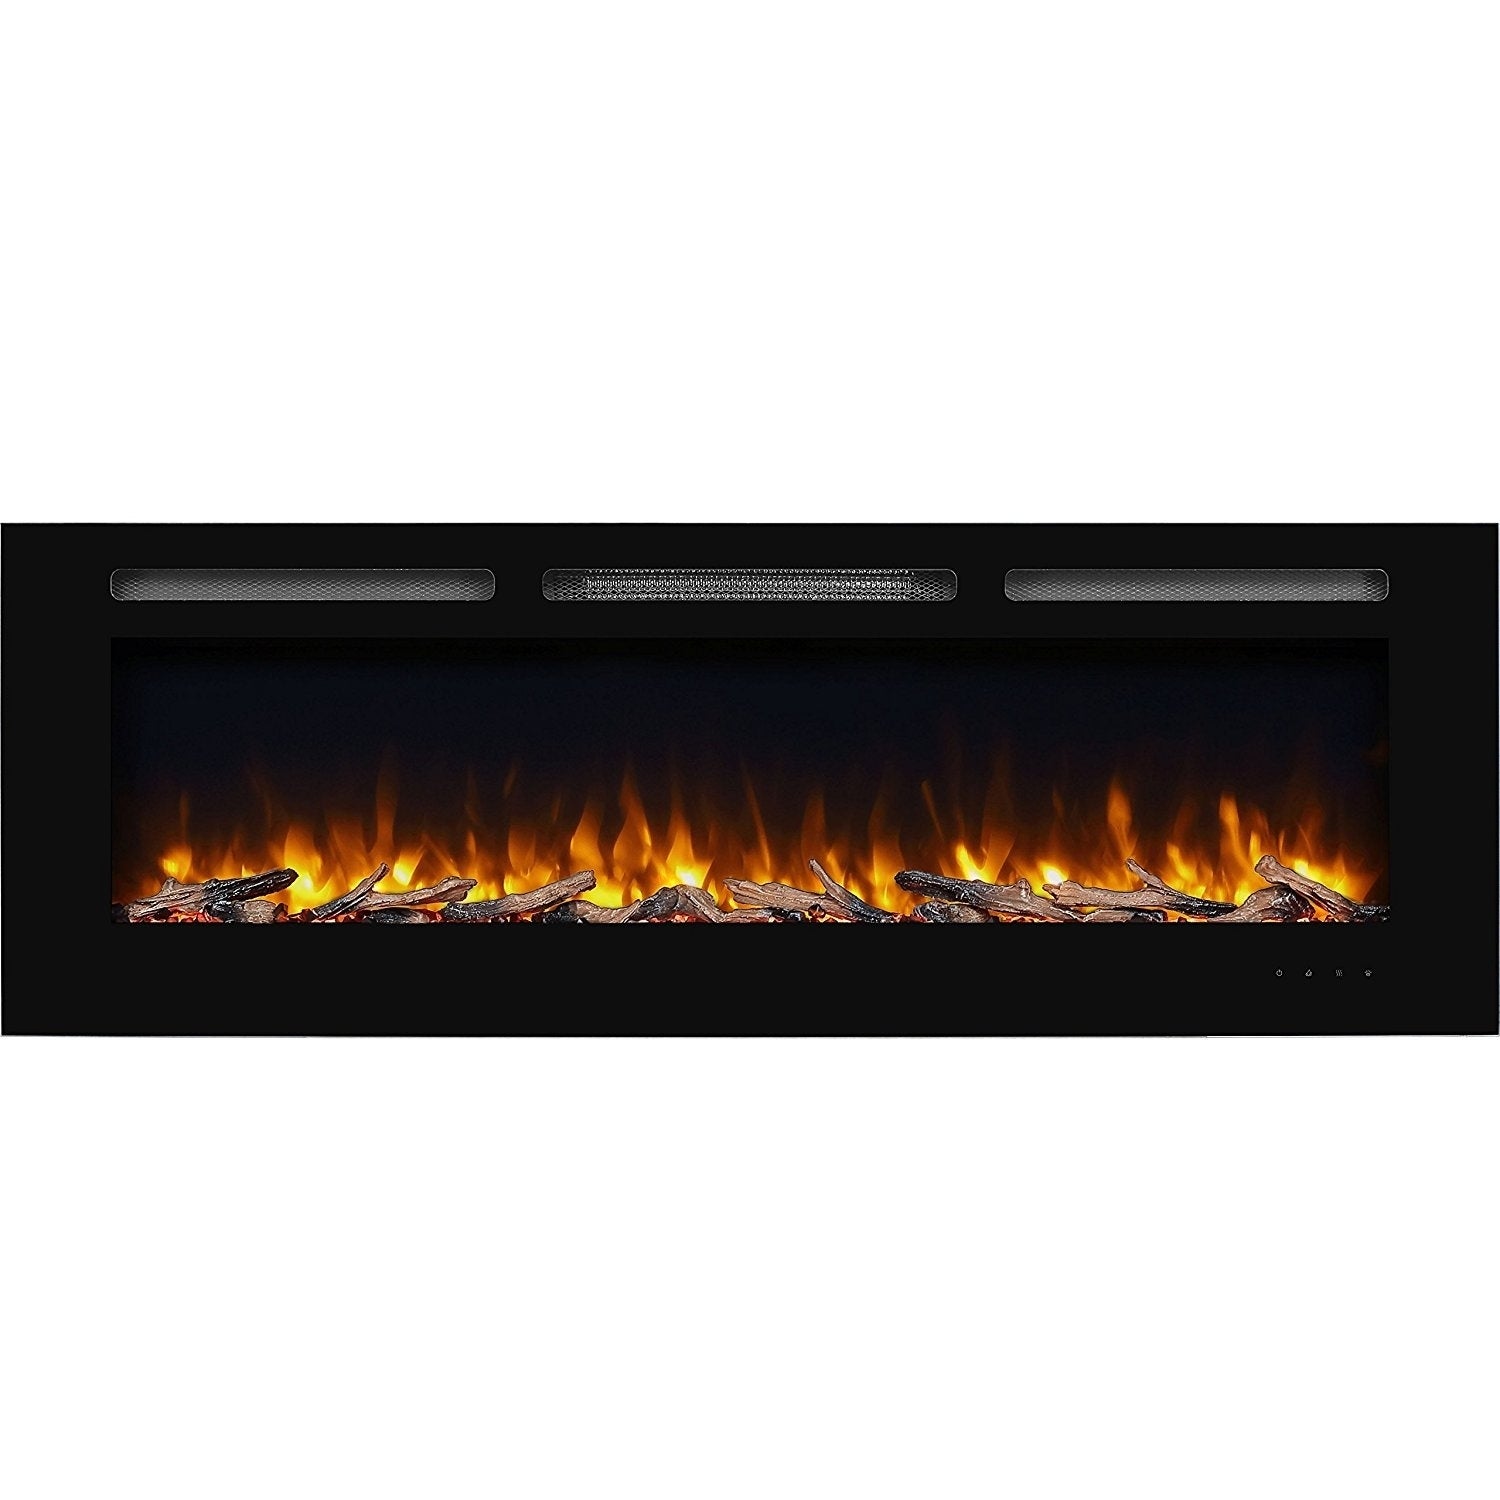 60 Alice In Wall Recessed Electric Fireplace 1500W Black b227a038 9965 4dc4 8466 a8c8daccace6